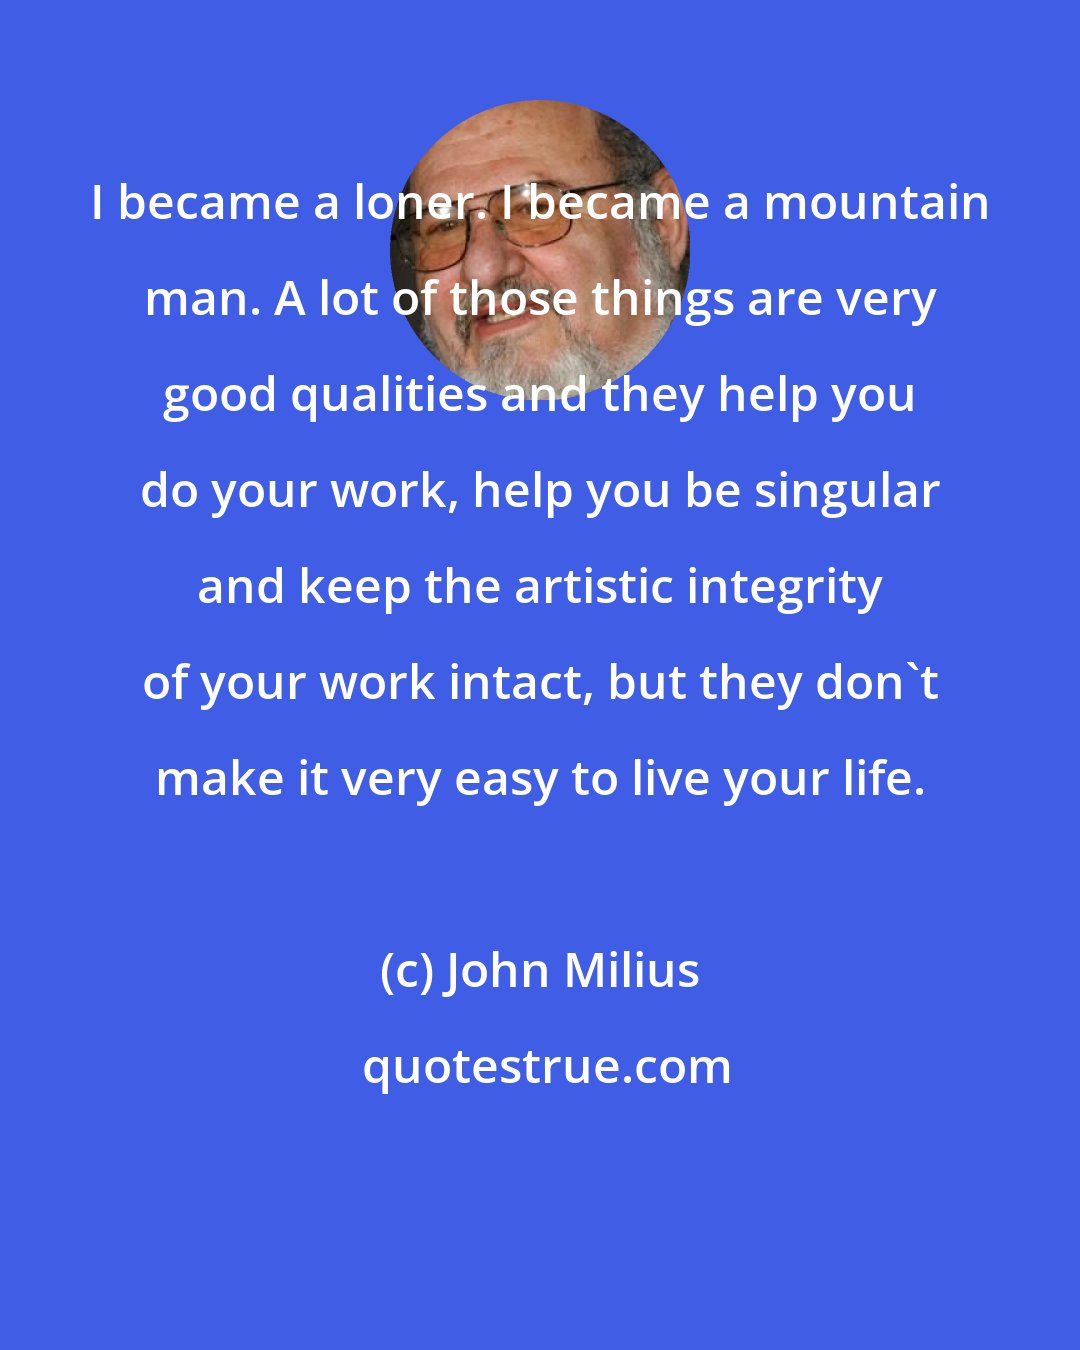 John Milius: I became a loner. I became a mountain man. A lot of those things are very good qualities and they help you do your work, help you be singular and keep the artistic integrity of your work intact, but they don't make it very easy to live your life.